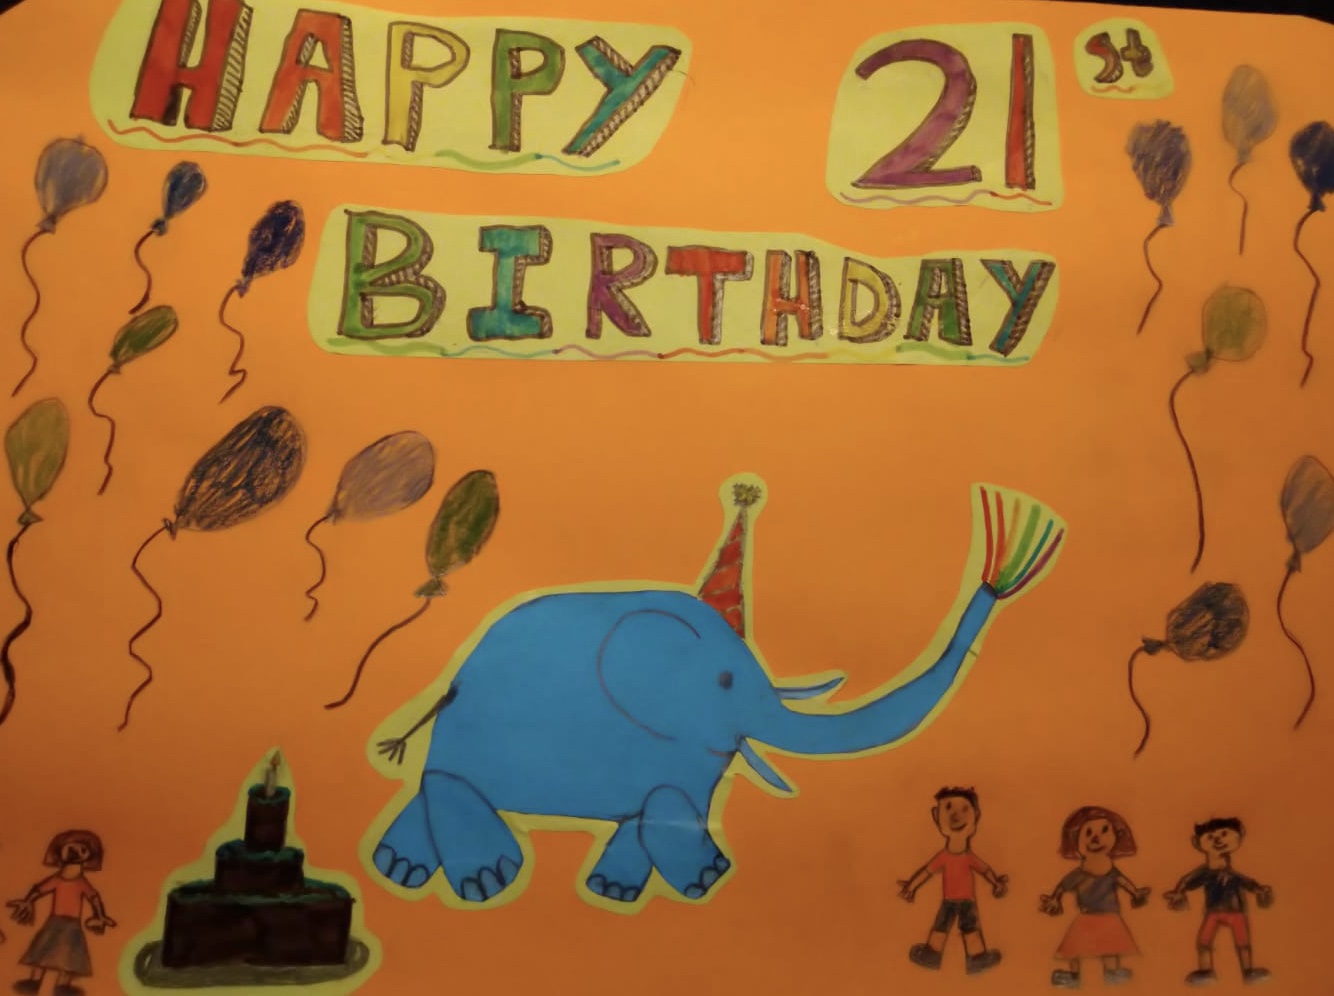 Under 10's entry reading Happy 21st Birthday, with a blue elephant on an orange background